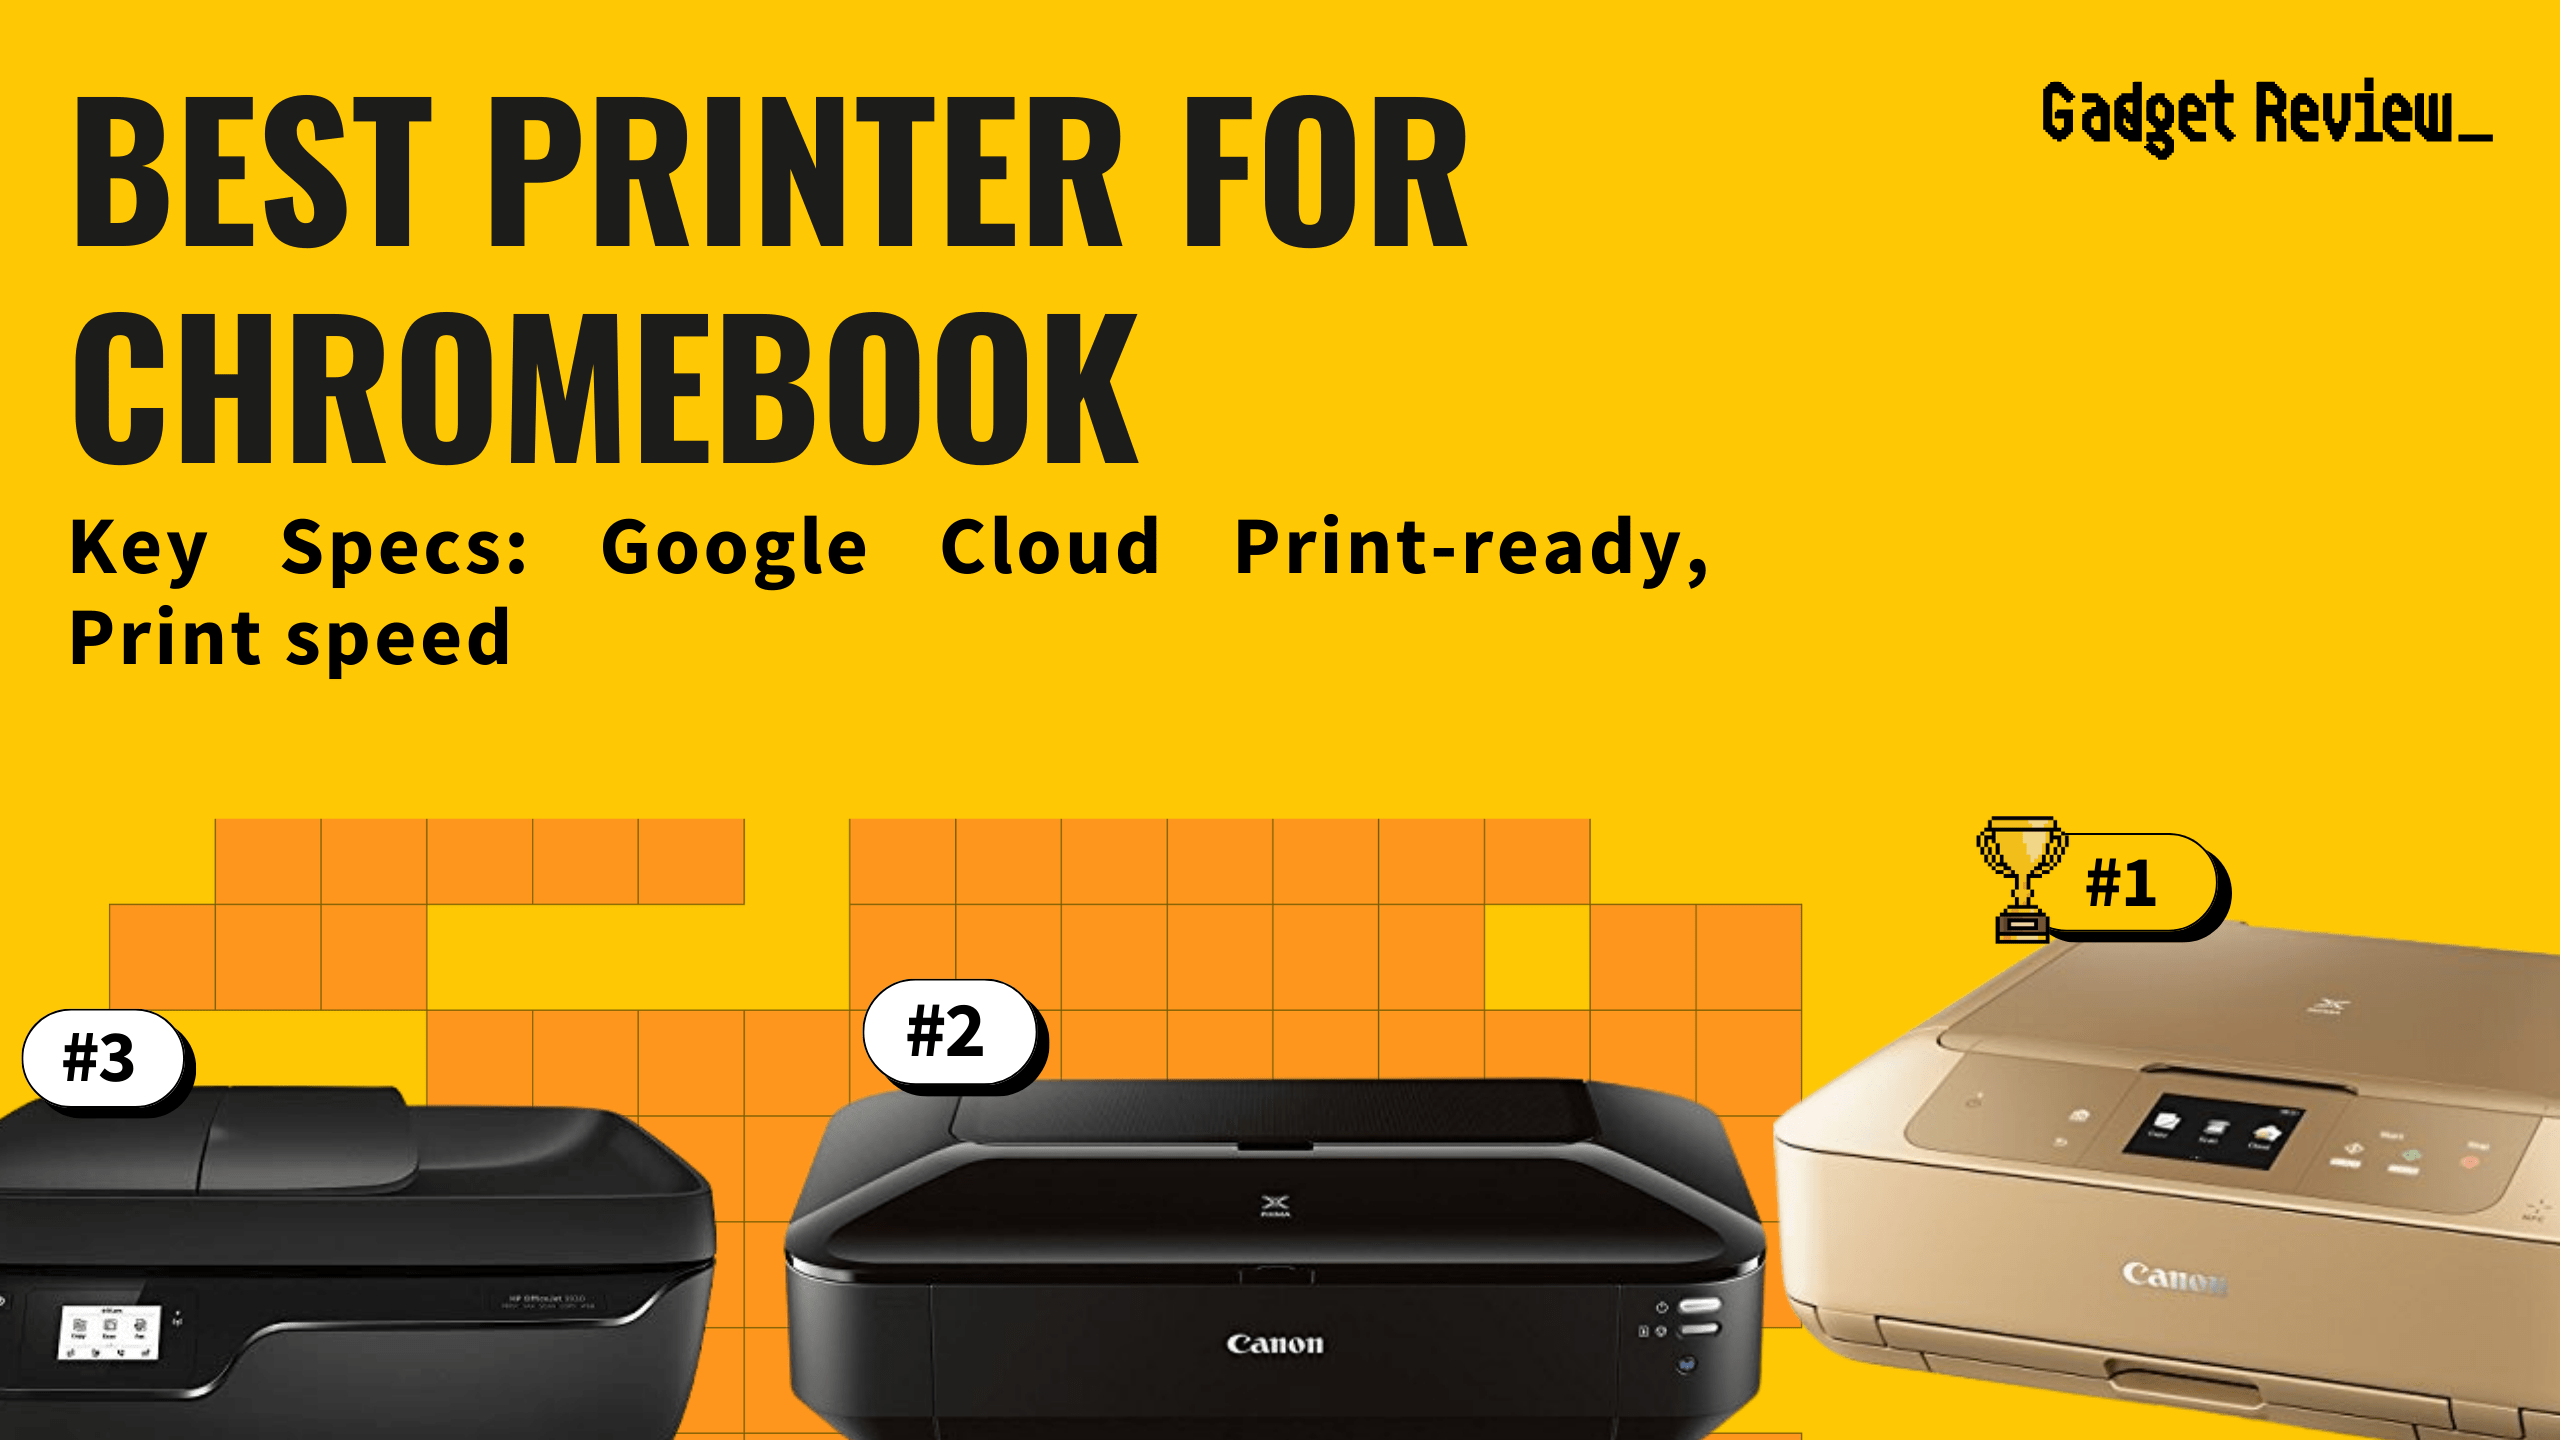 best printer for chromebook featured image that shows the top three best printer models